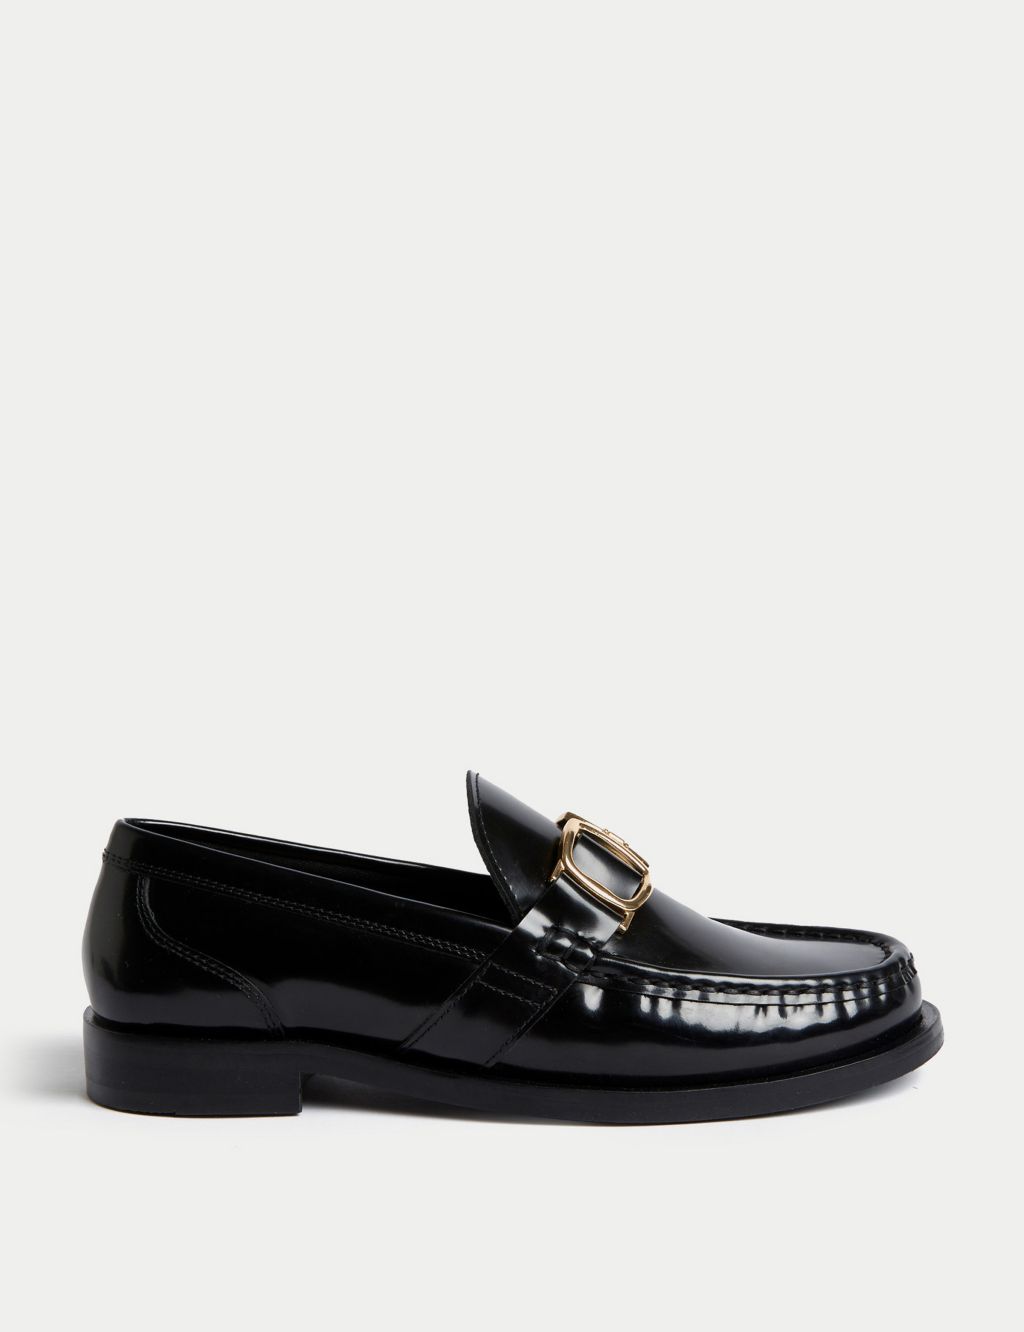 Leather Trim Flat Loafers image 3